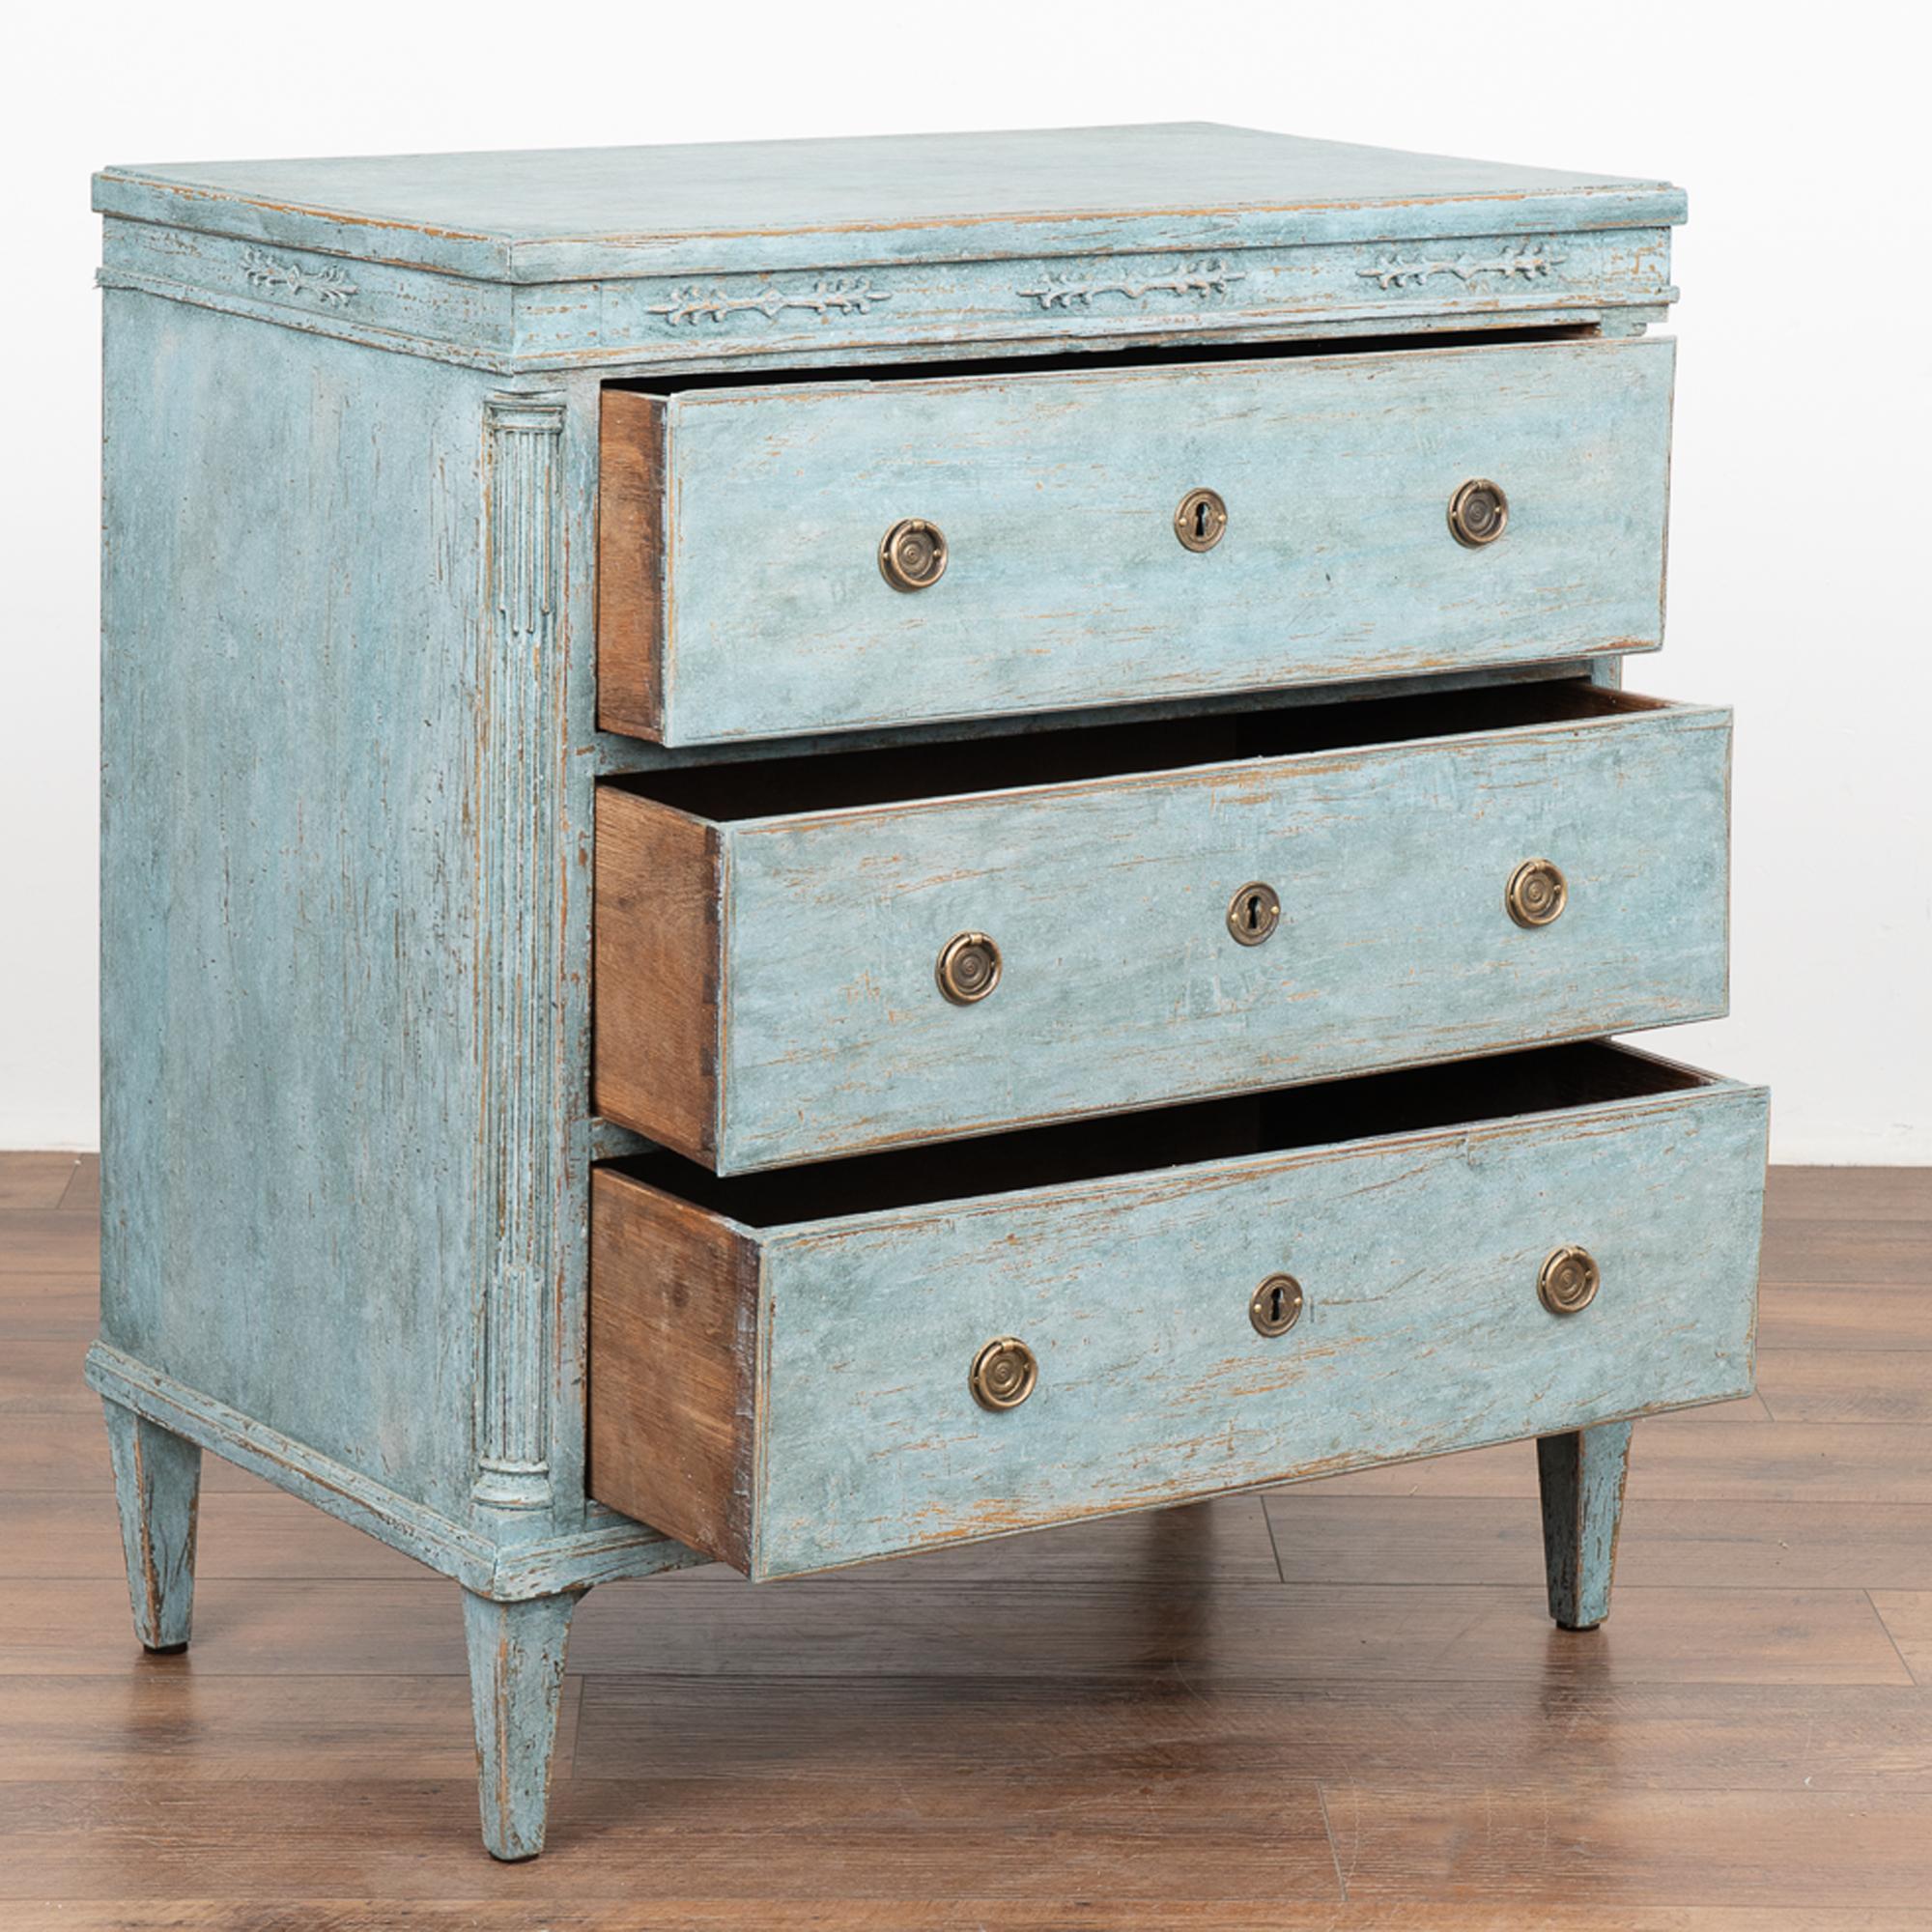 Danish Blue Painted Chest of Three Drawers, Denmark circa 1840 For Sale